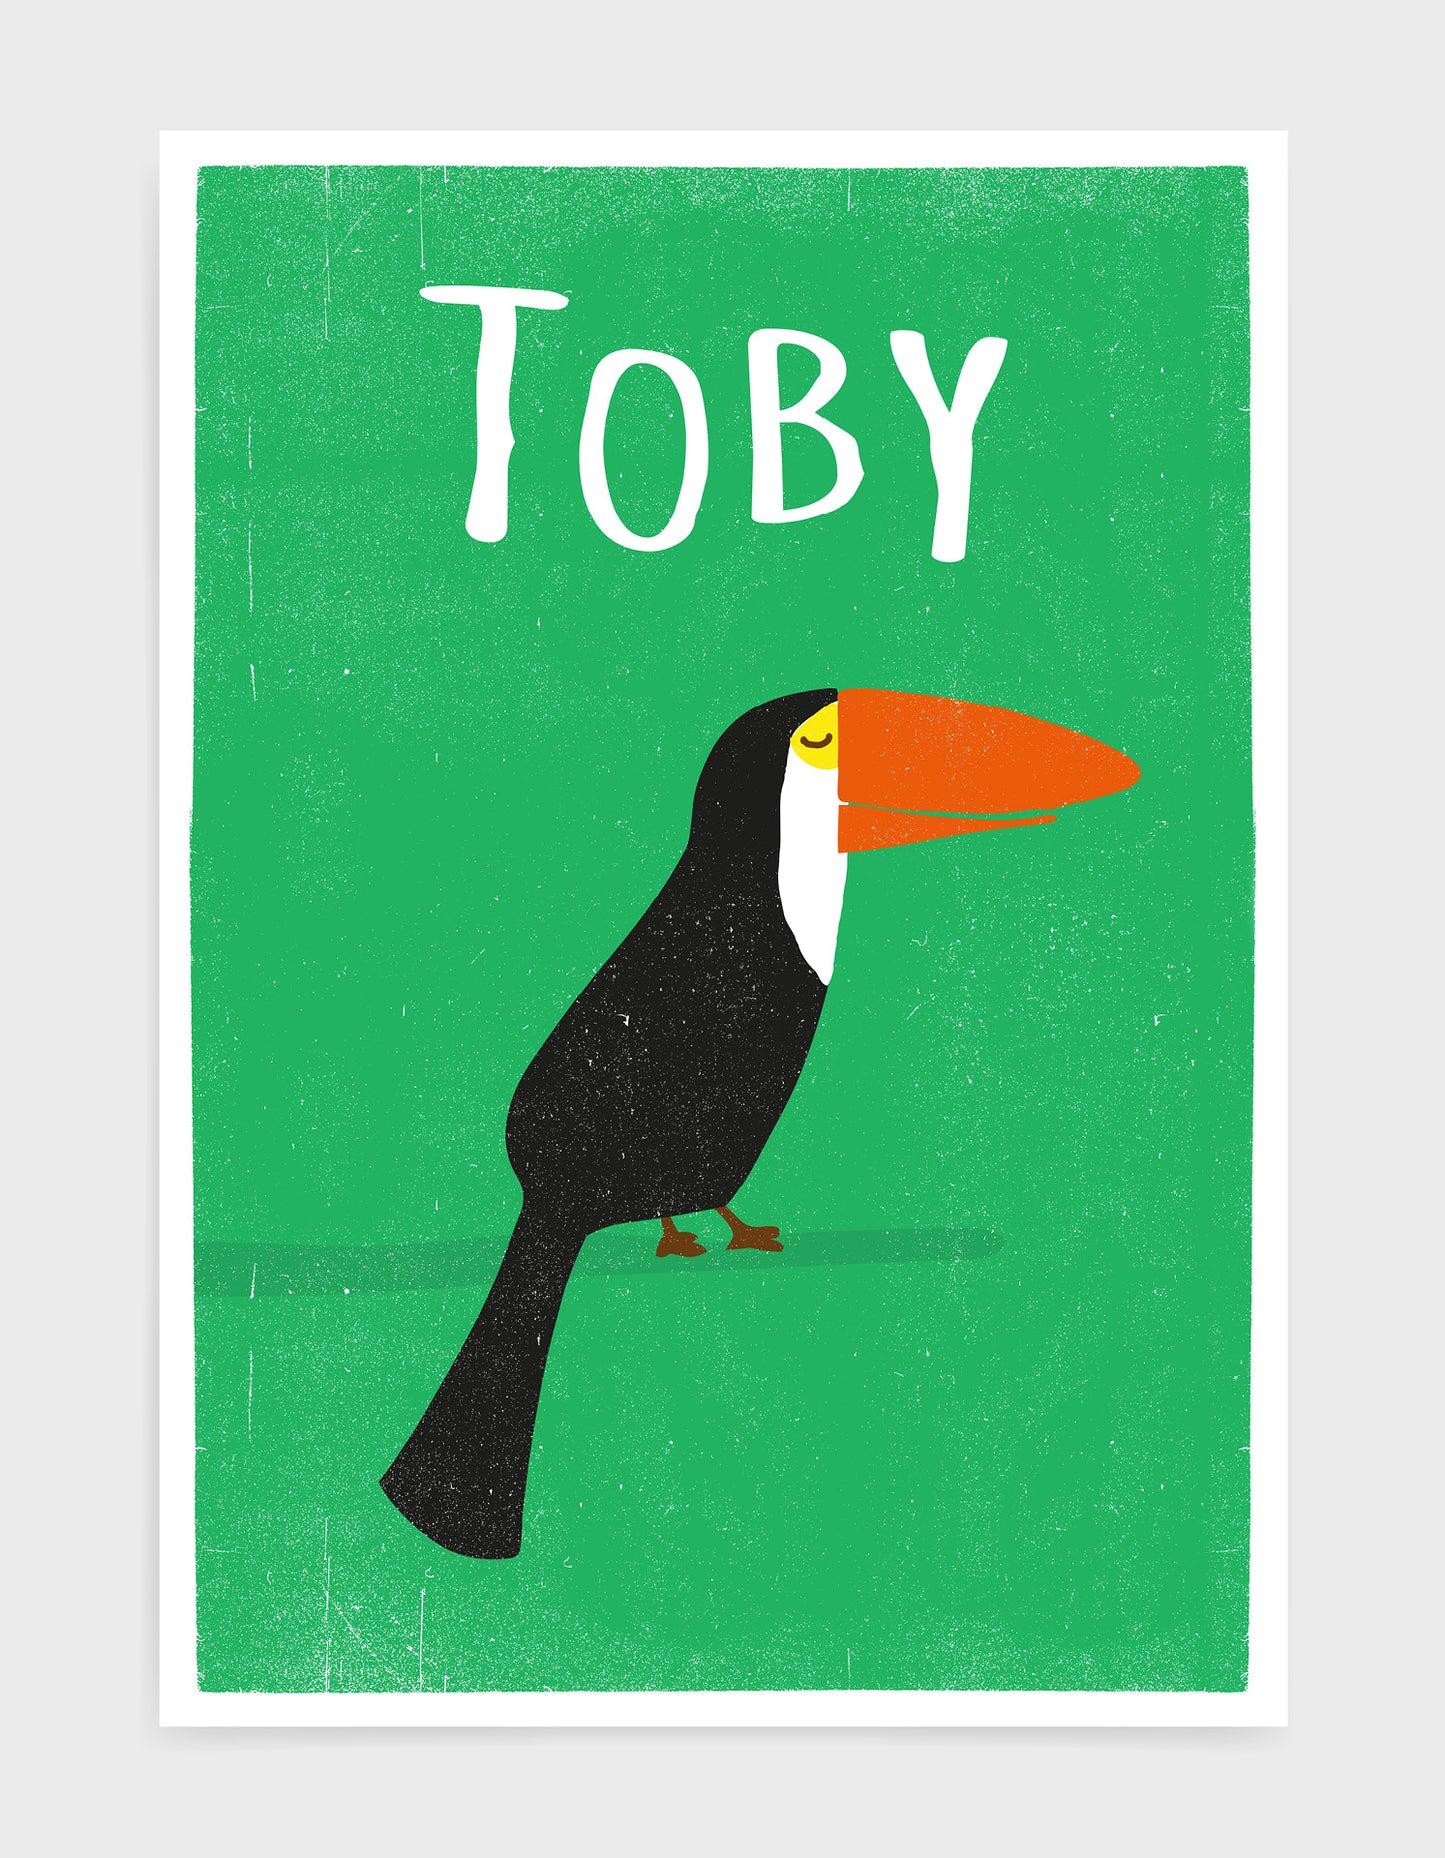 art print of a toucan bird in profile against a green background with child name above